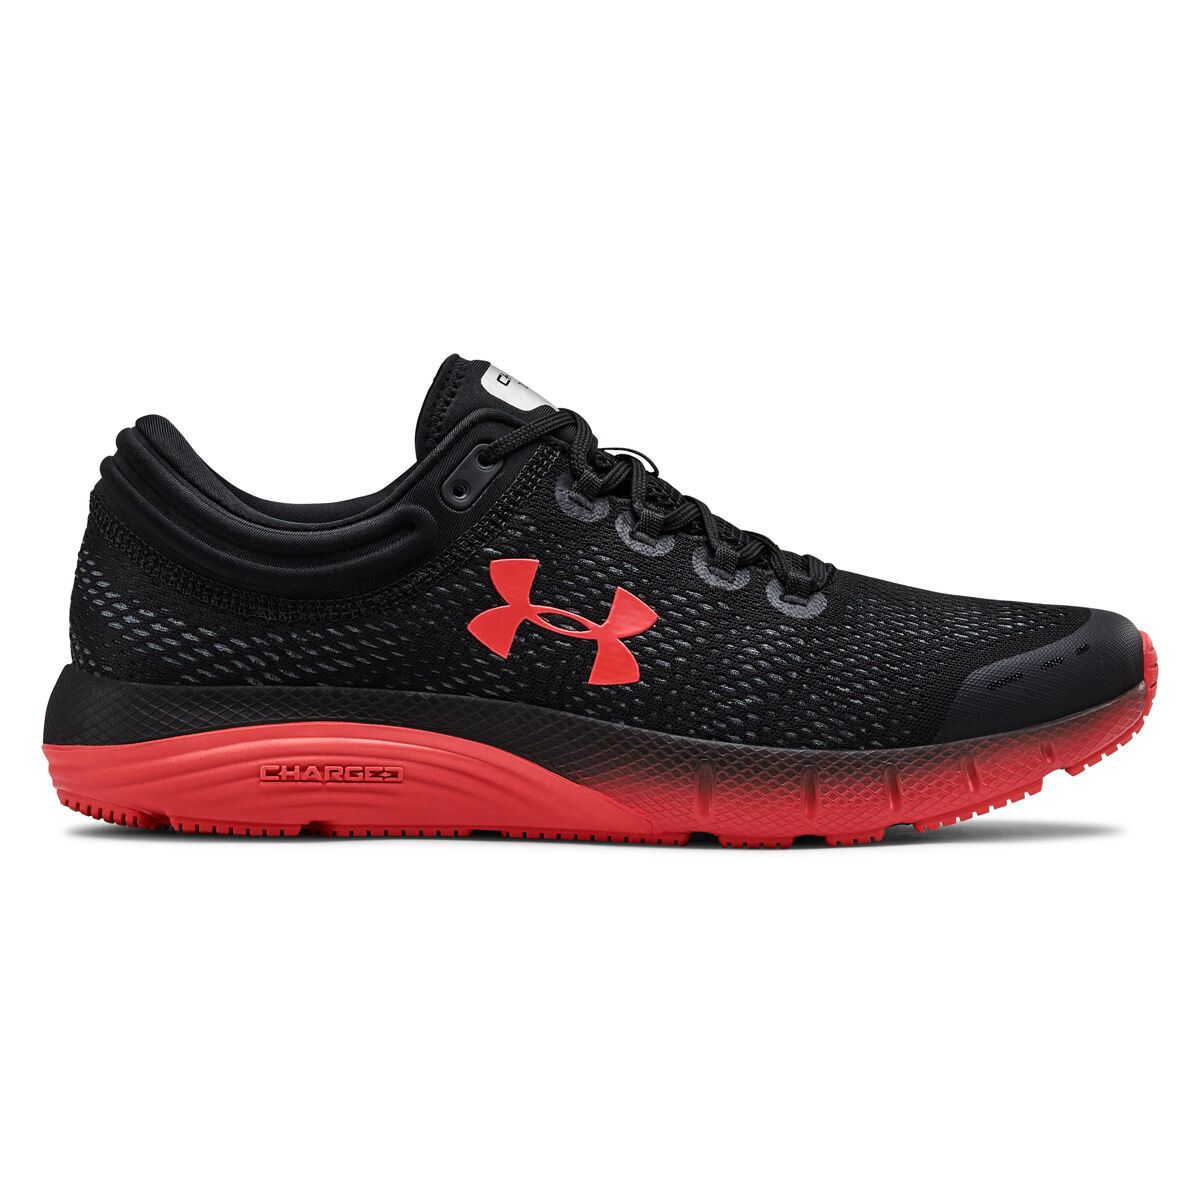 Under Armour Charged Bandit 5 Mens 